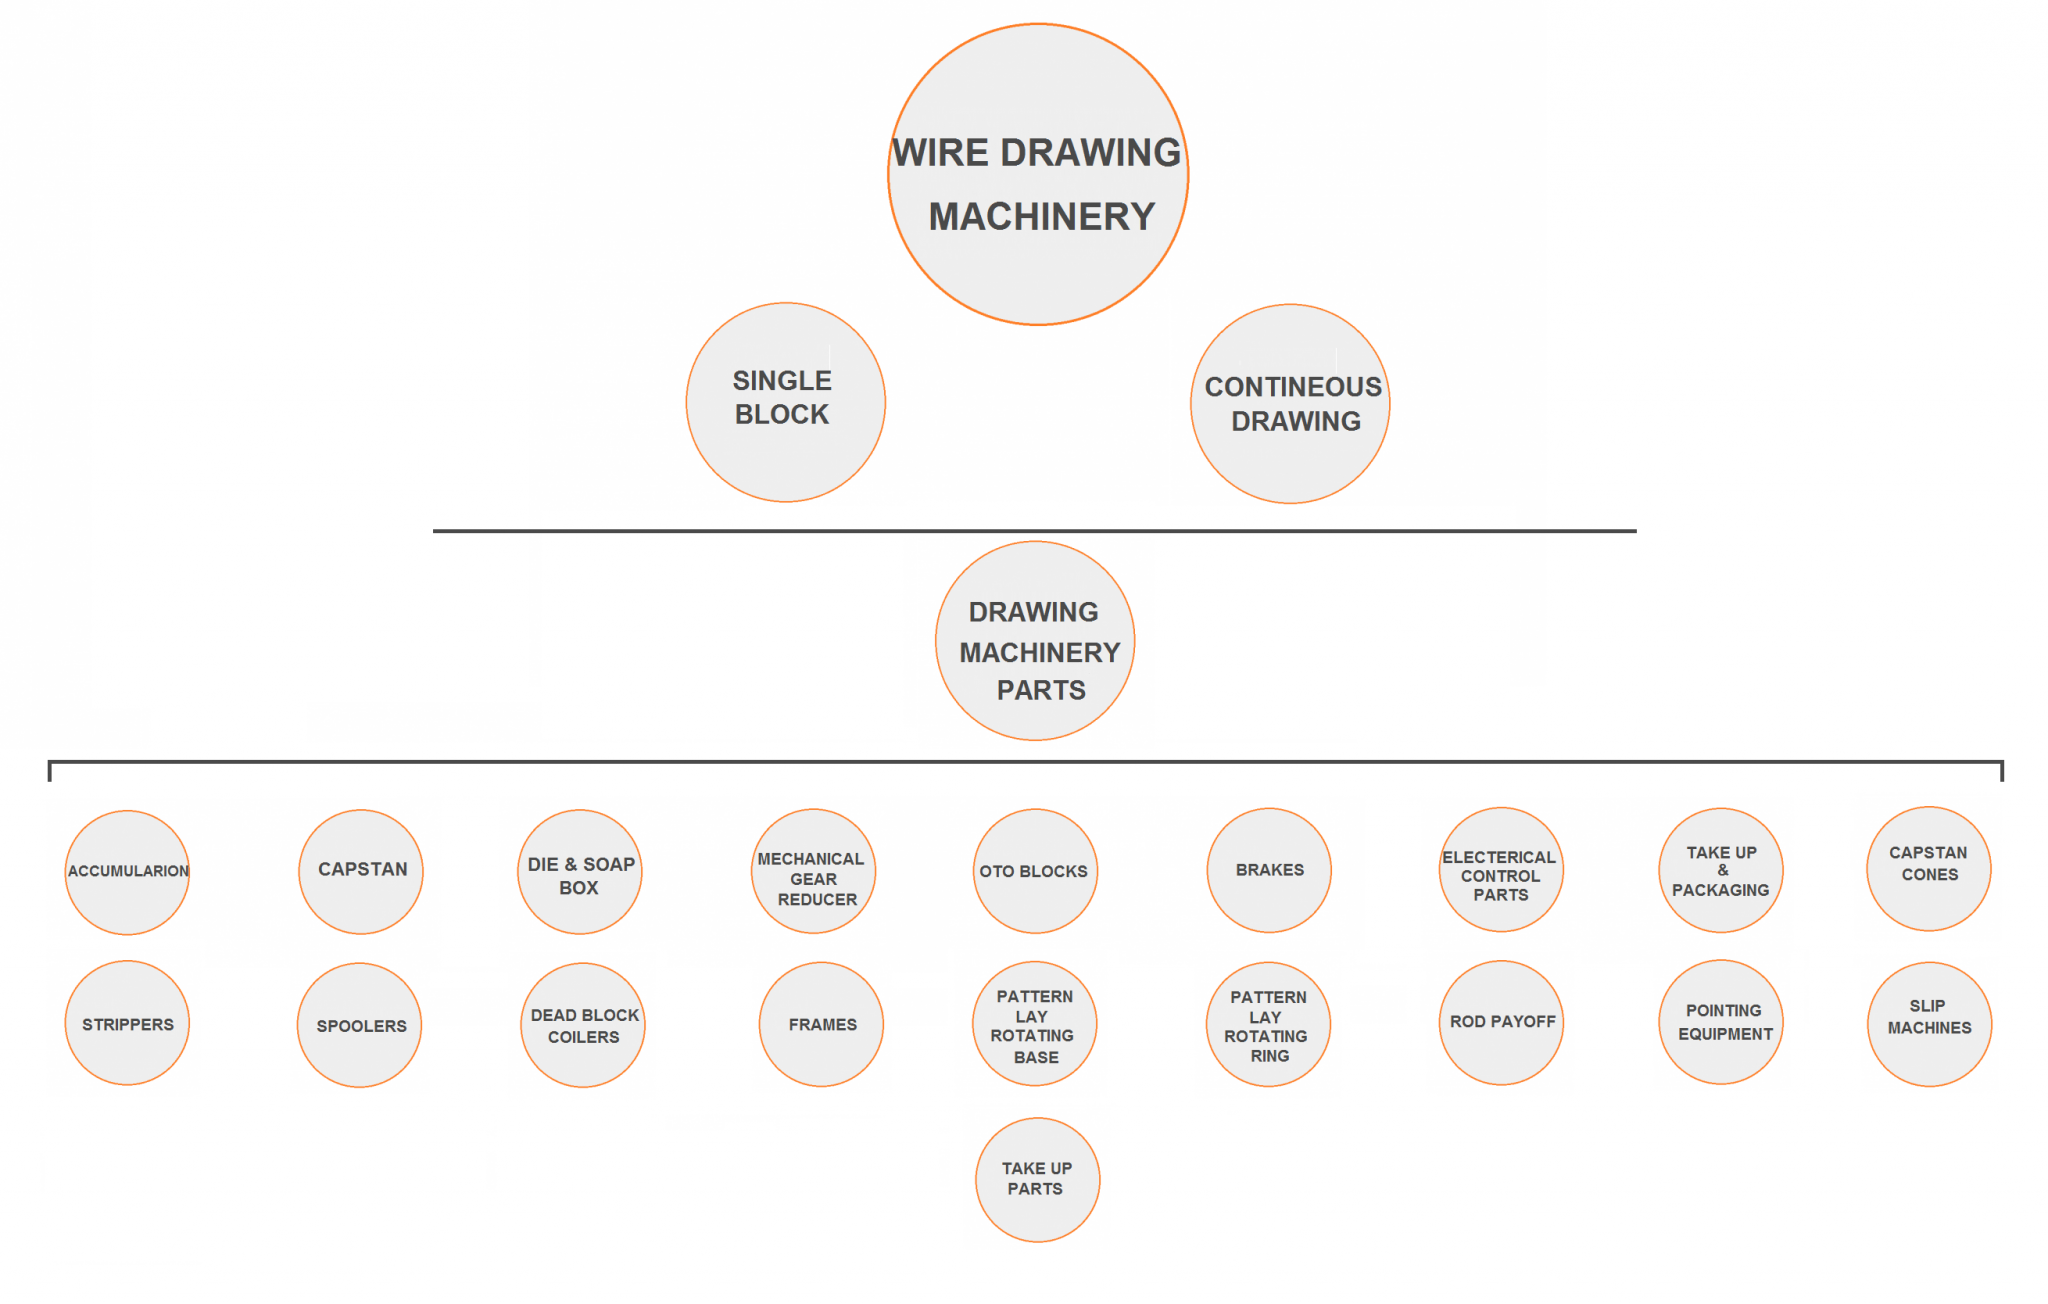 Wire Drawing Machinery Classification